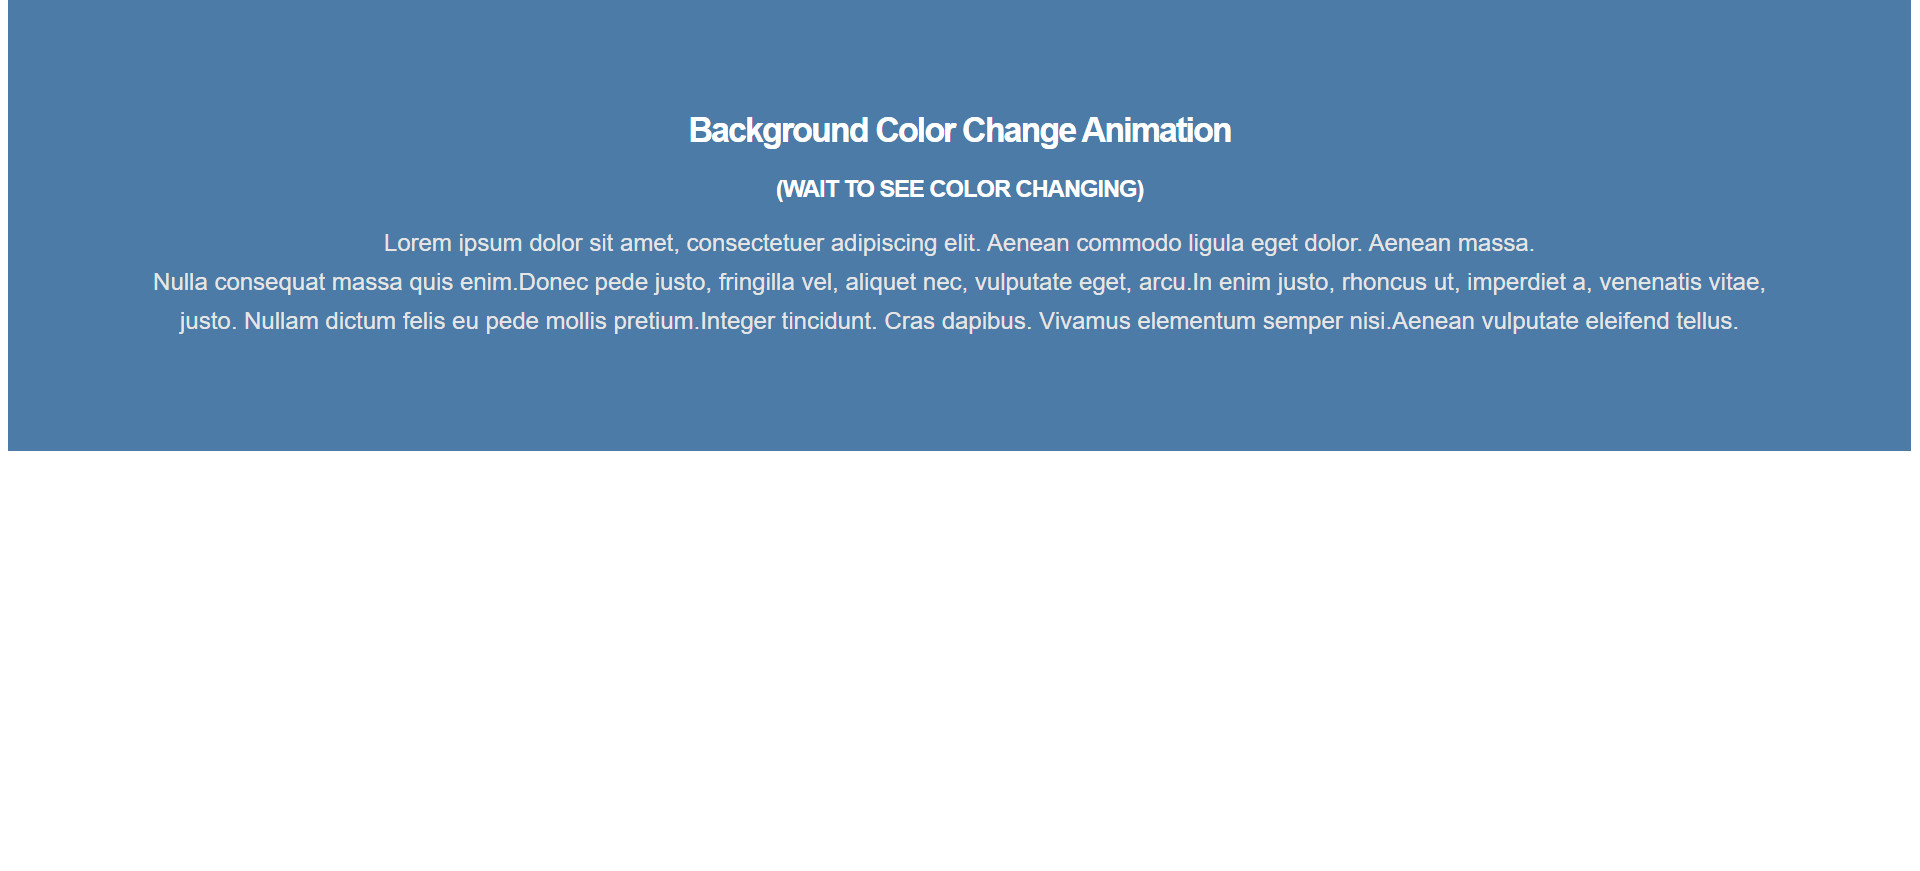 Shortcodes sections and parallax - background-color-change-animation แนะนำ เว็บไซต์สำเร็จรูป NineNIC